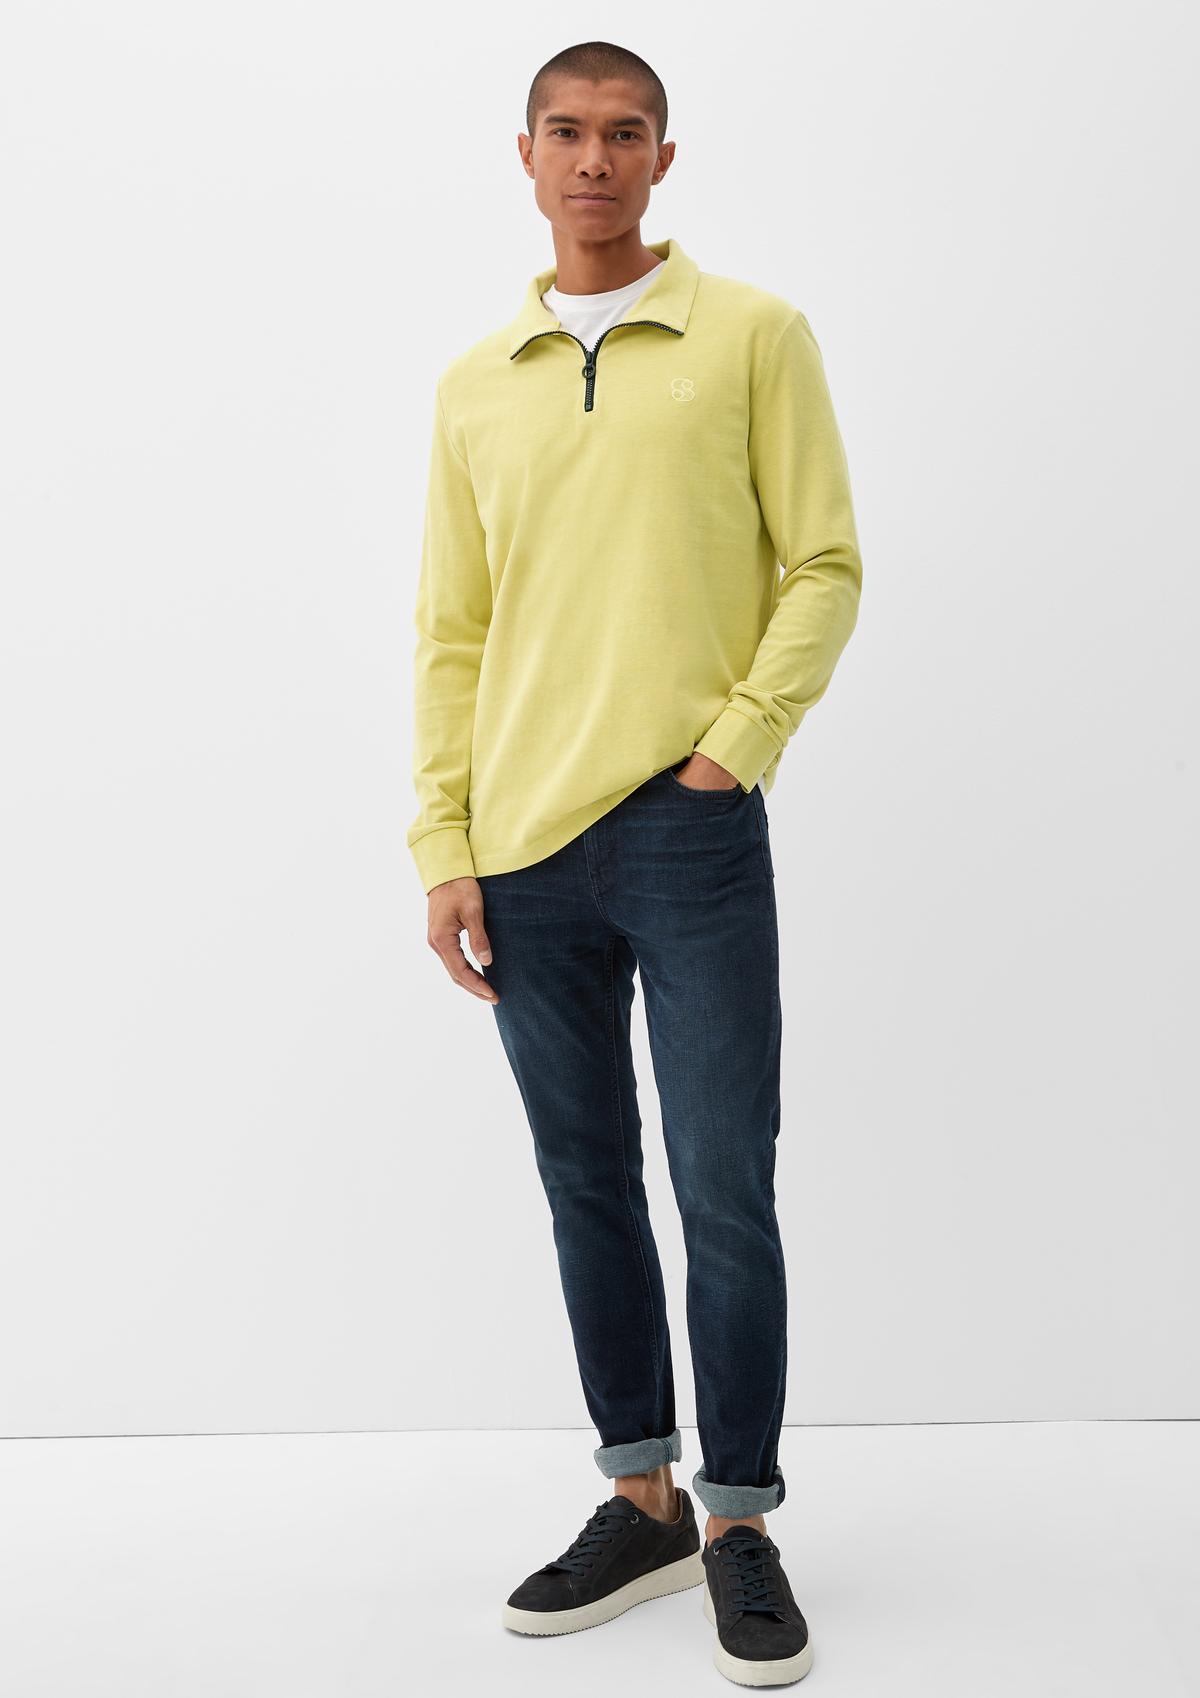 s.Oliver Top with a zip neck